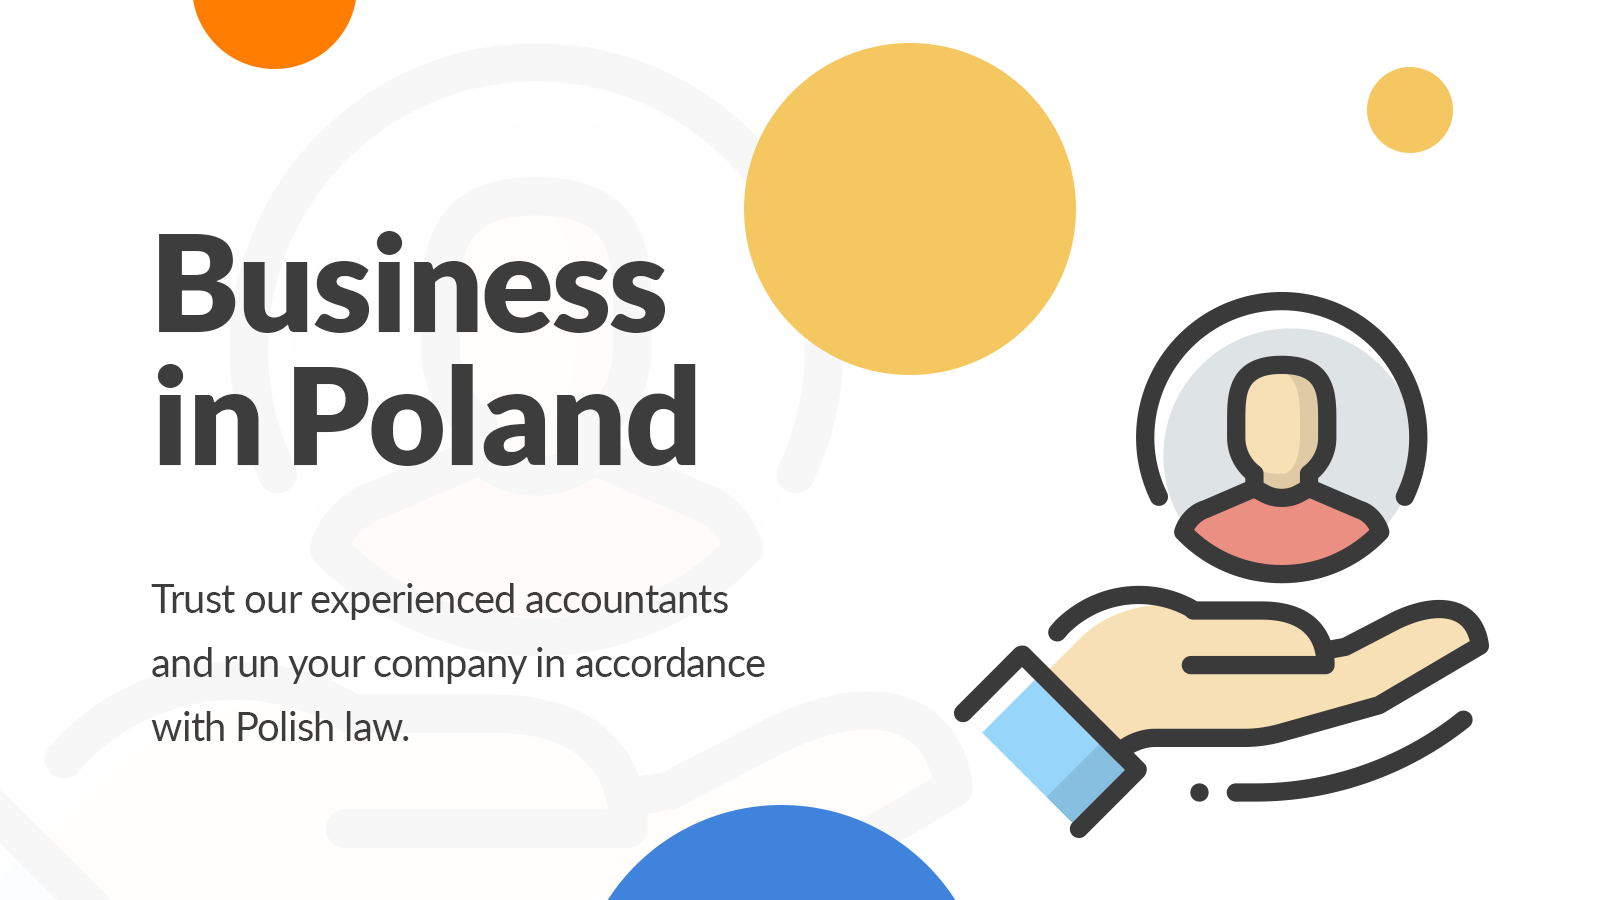 Business in Poland